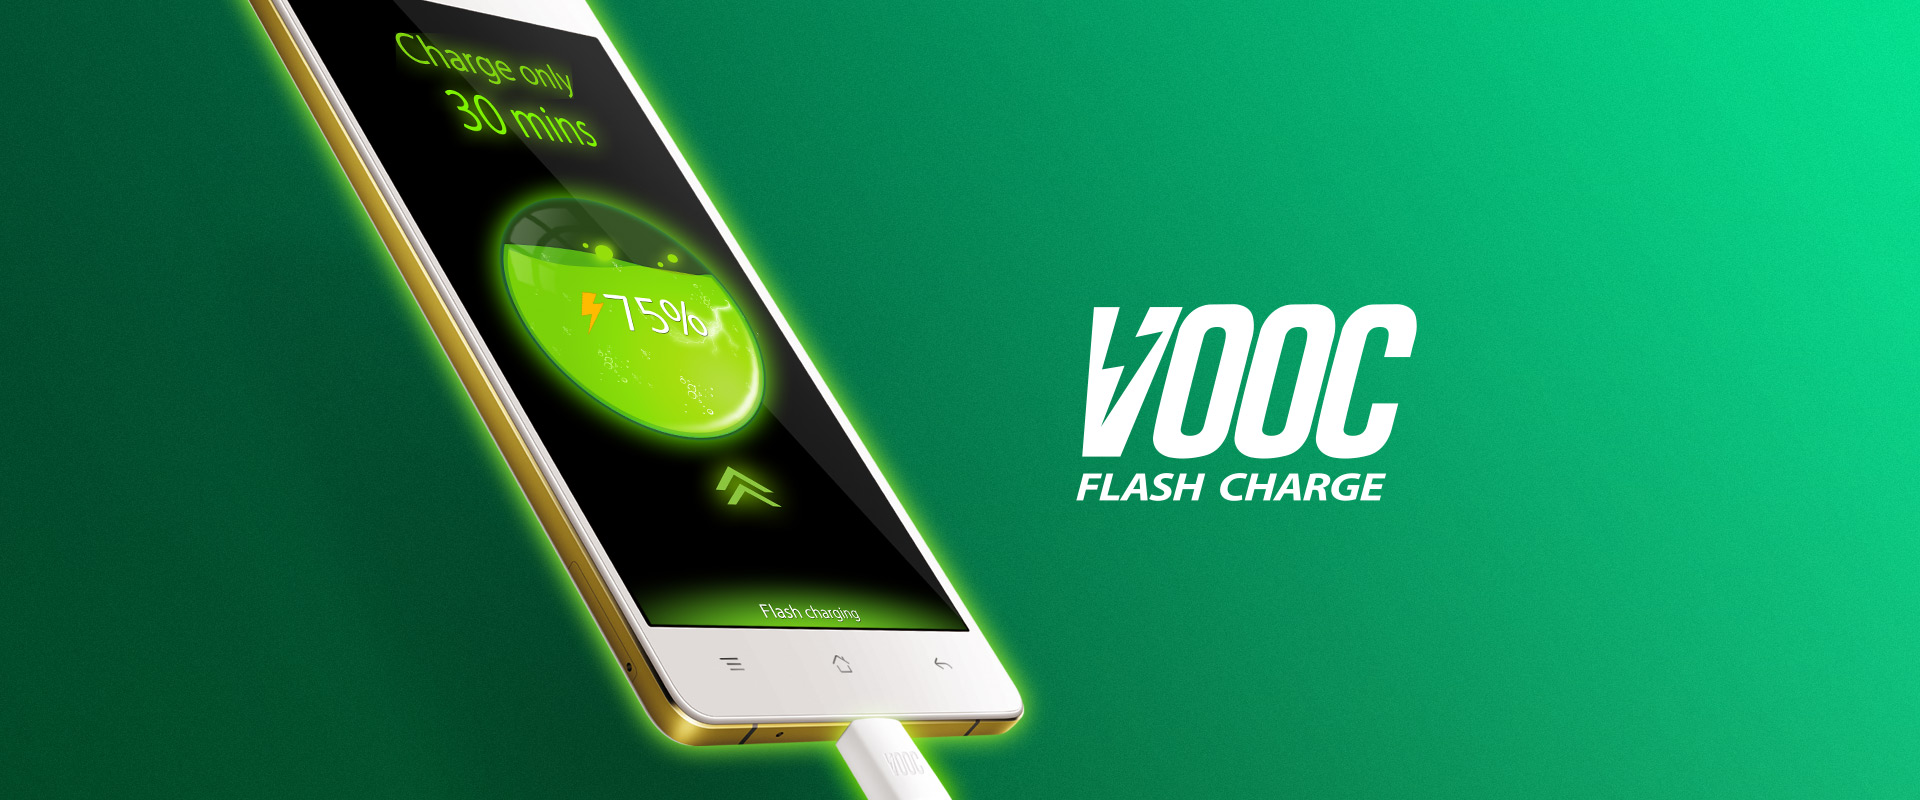 Oppo Vooc Flash Charge